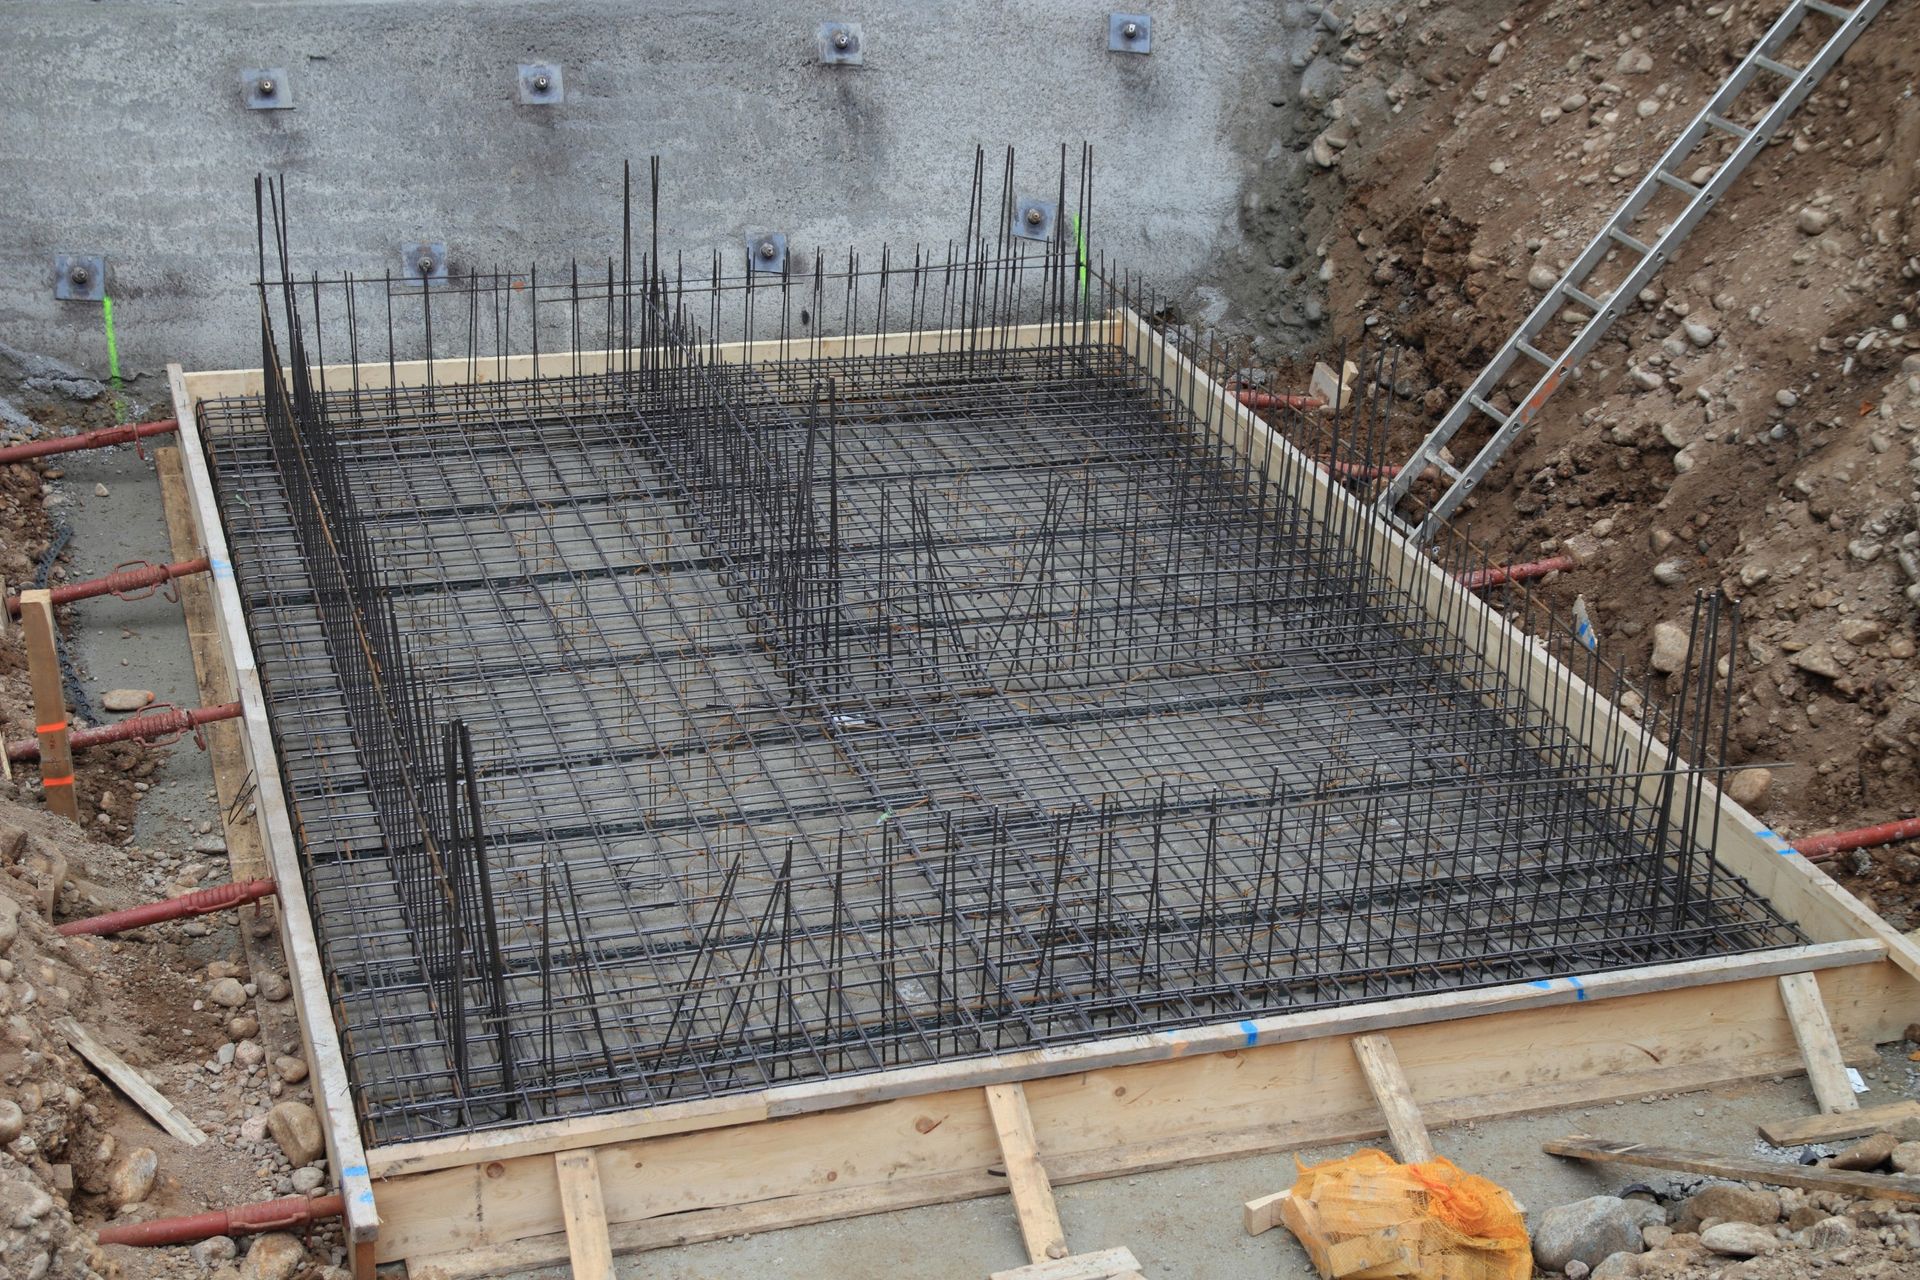 A construction site in West Palm Beach features a rectangular foundation being prepared. Steel rebar is arranged in a grid pattern within a wooden frame on the concrete slab. There is a dirt embankment around the site and a ladder leaning against the dirt on the right side.